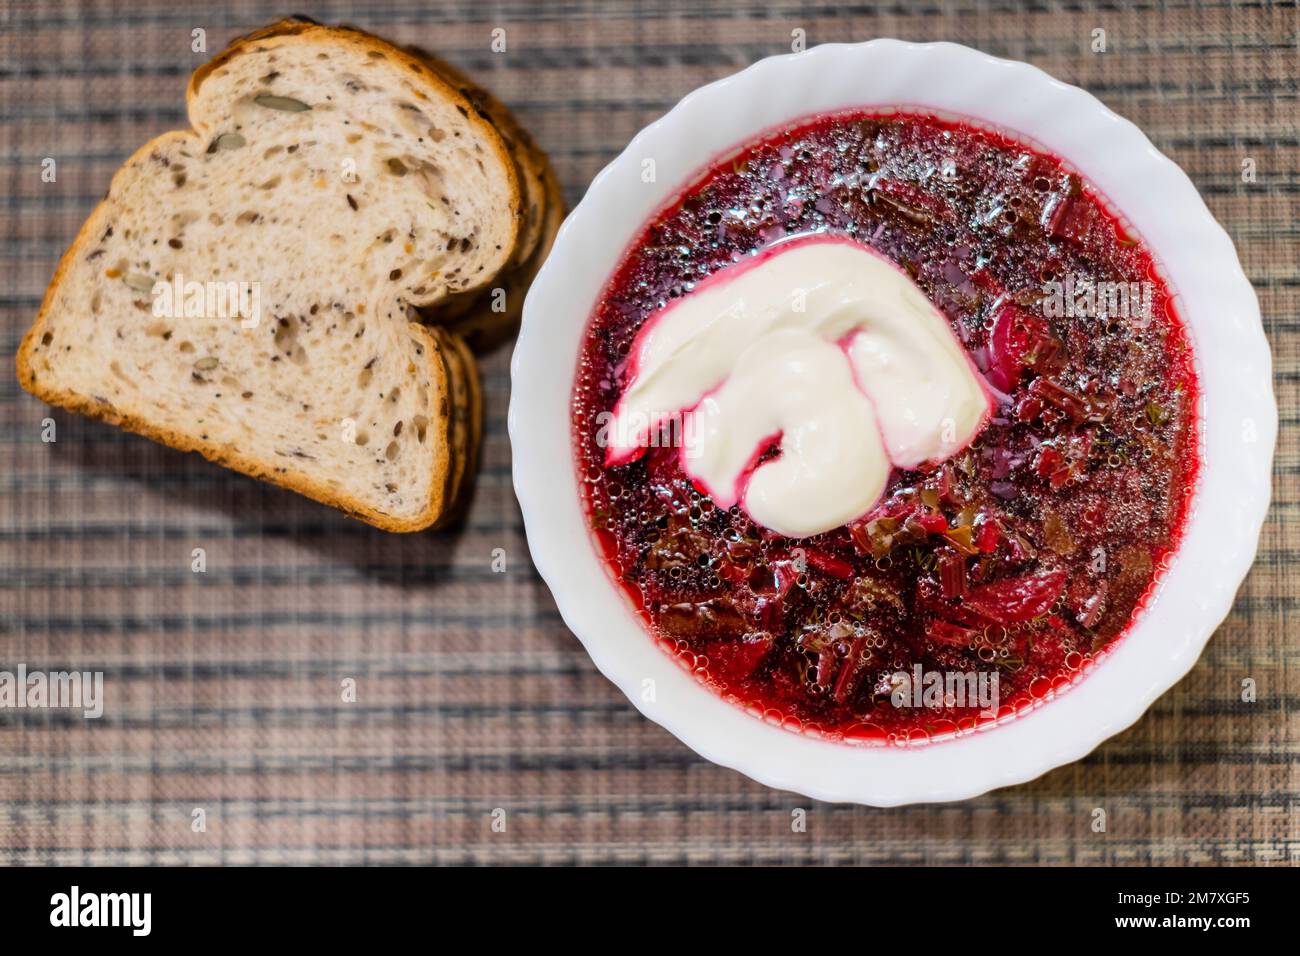 Borscht - sour soup common in Eastern Europe - made with red beetroots and sour cream - piece of bread Stock Photo